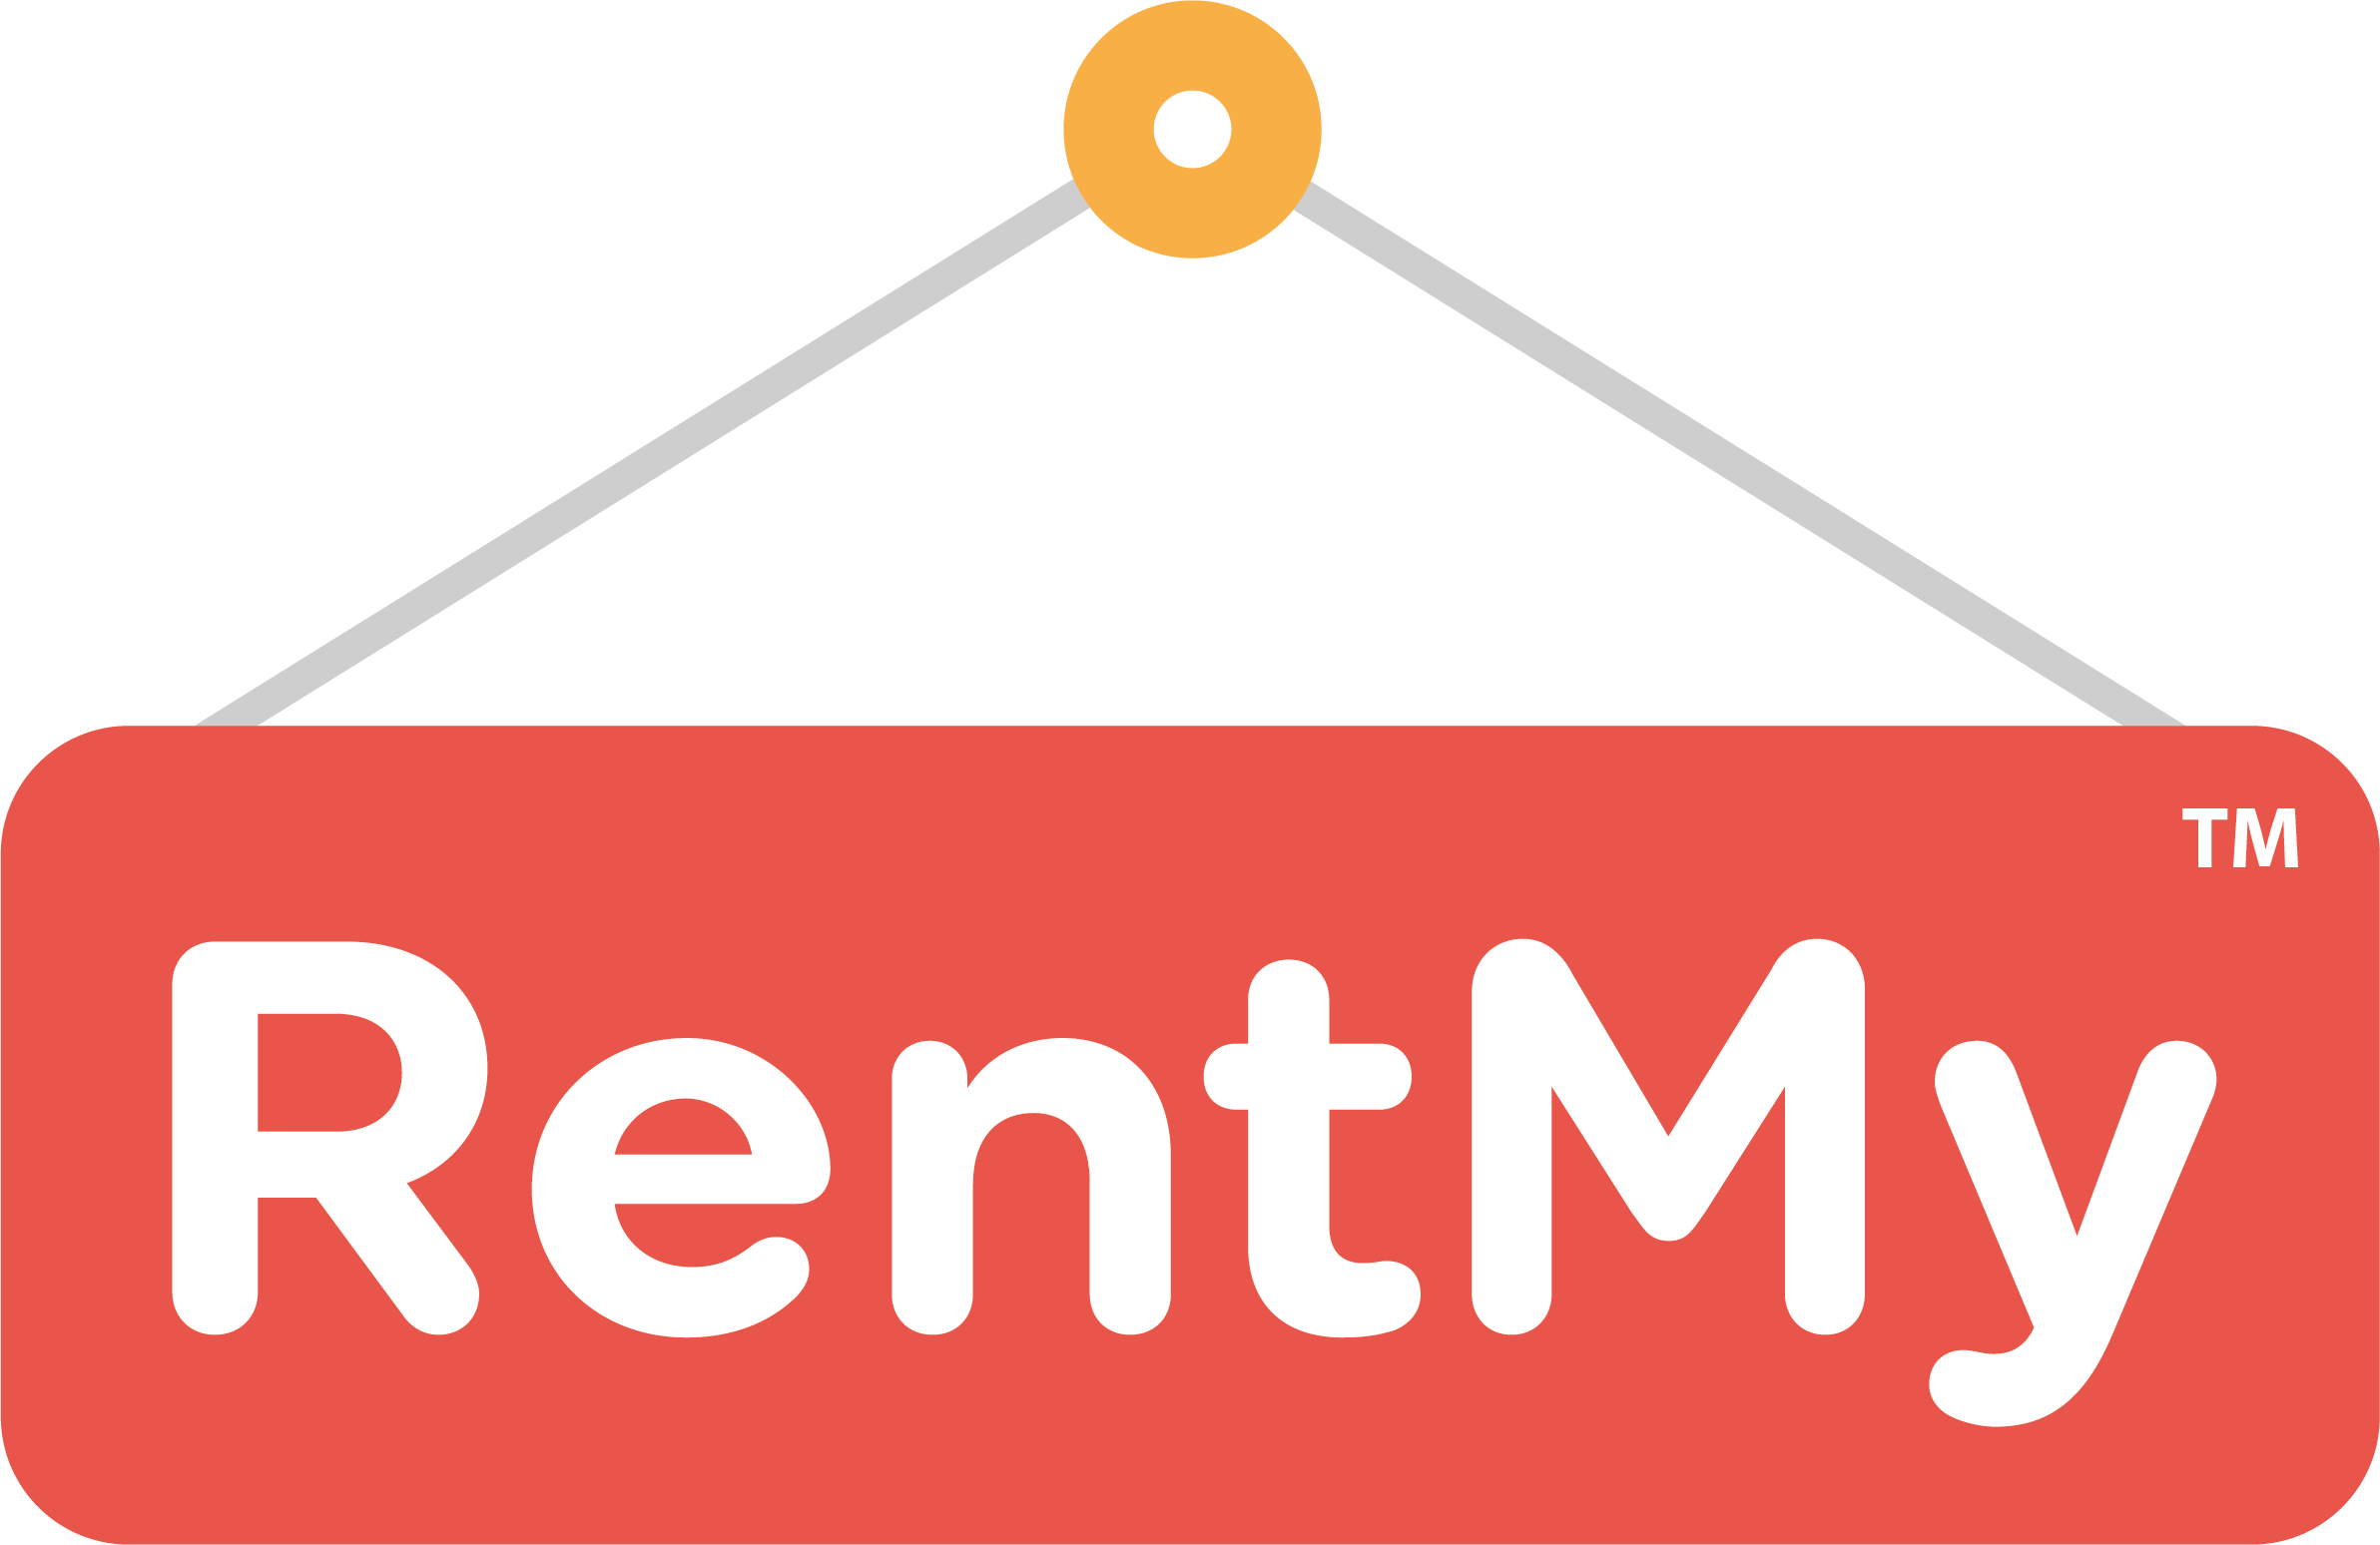 RentMy logo TM (please request brand guidelines on how to use)